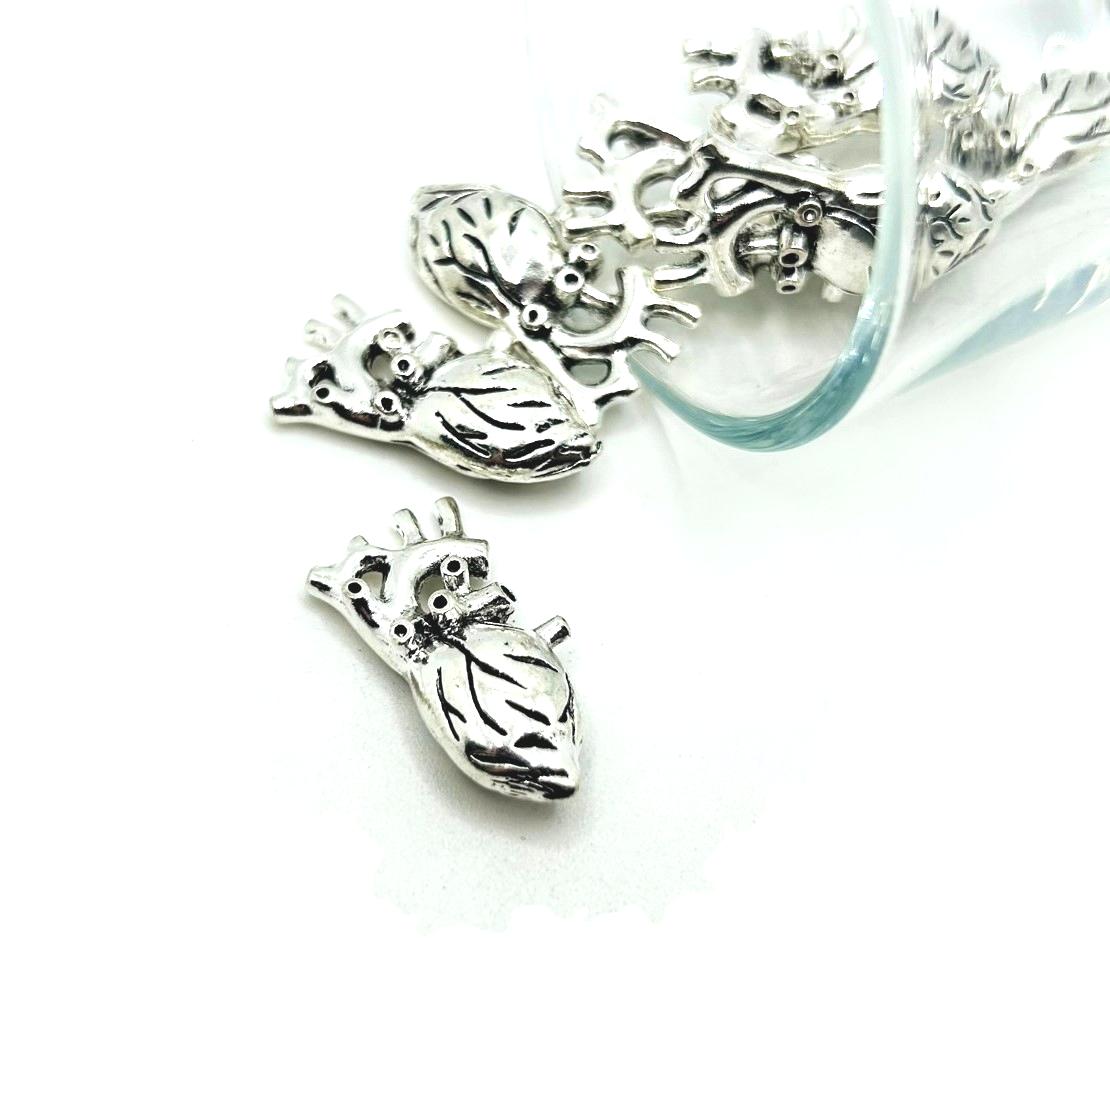 1, 4 or 20 Pieces: Silver Anatomical Human Heart 3D Charms